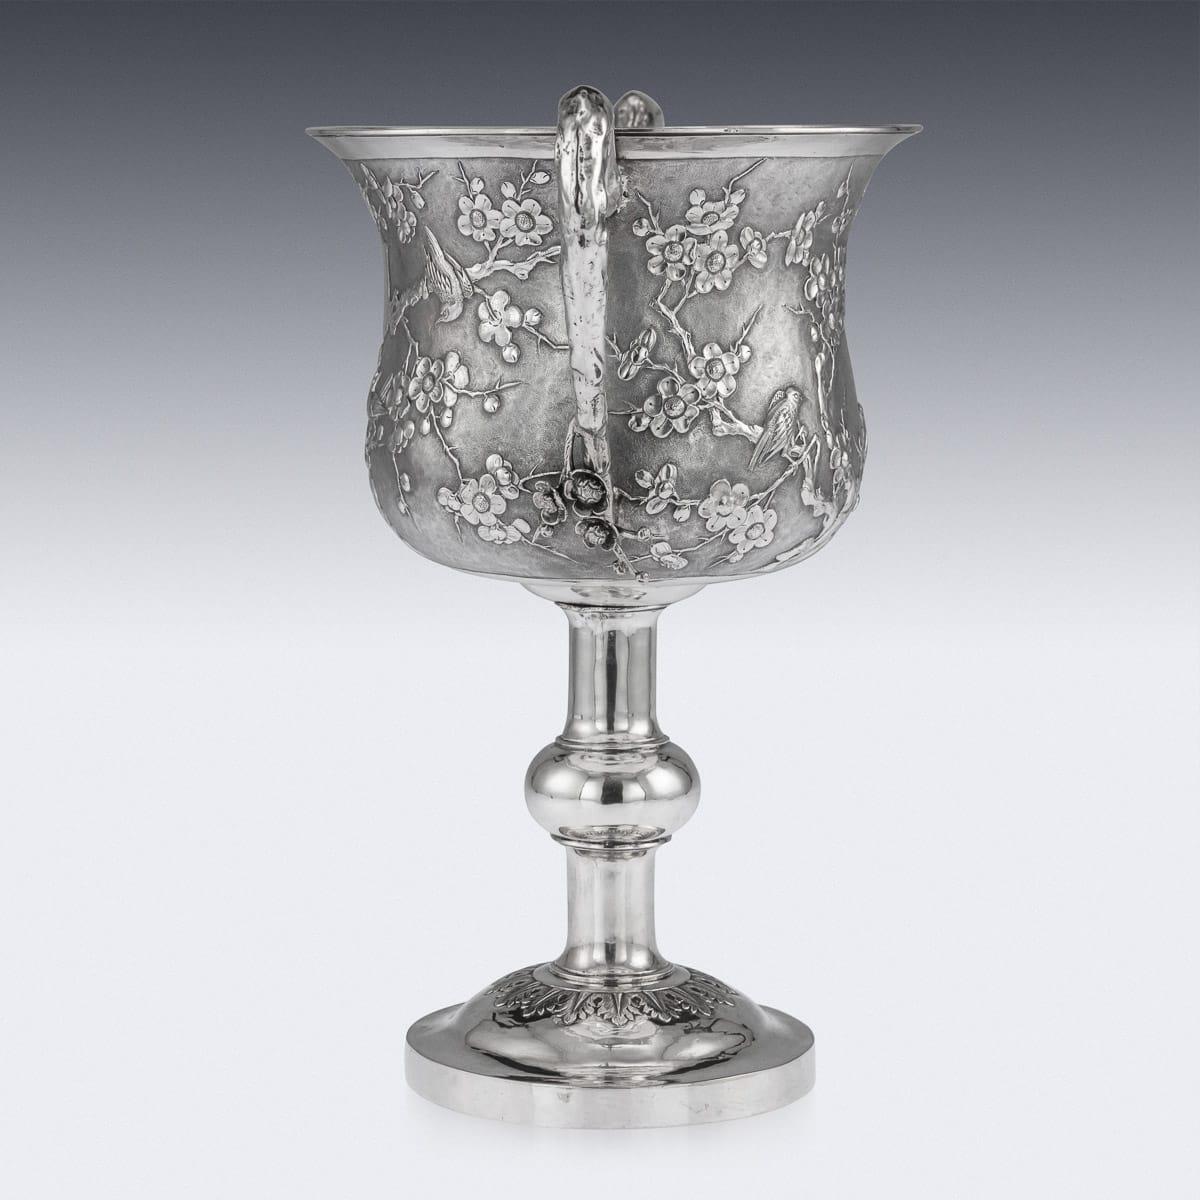 Antique late-19th Century Chinese export solid silver trophy cup, impressive and exceptionally fine quality, decorated with repoussé prunus and perched birds against a hand chased matted ground, cup resting on an elegant shaped stem and domed foot,